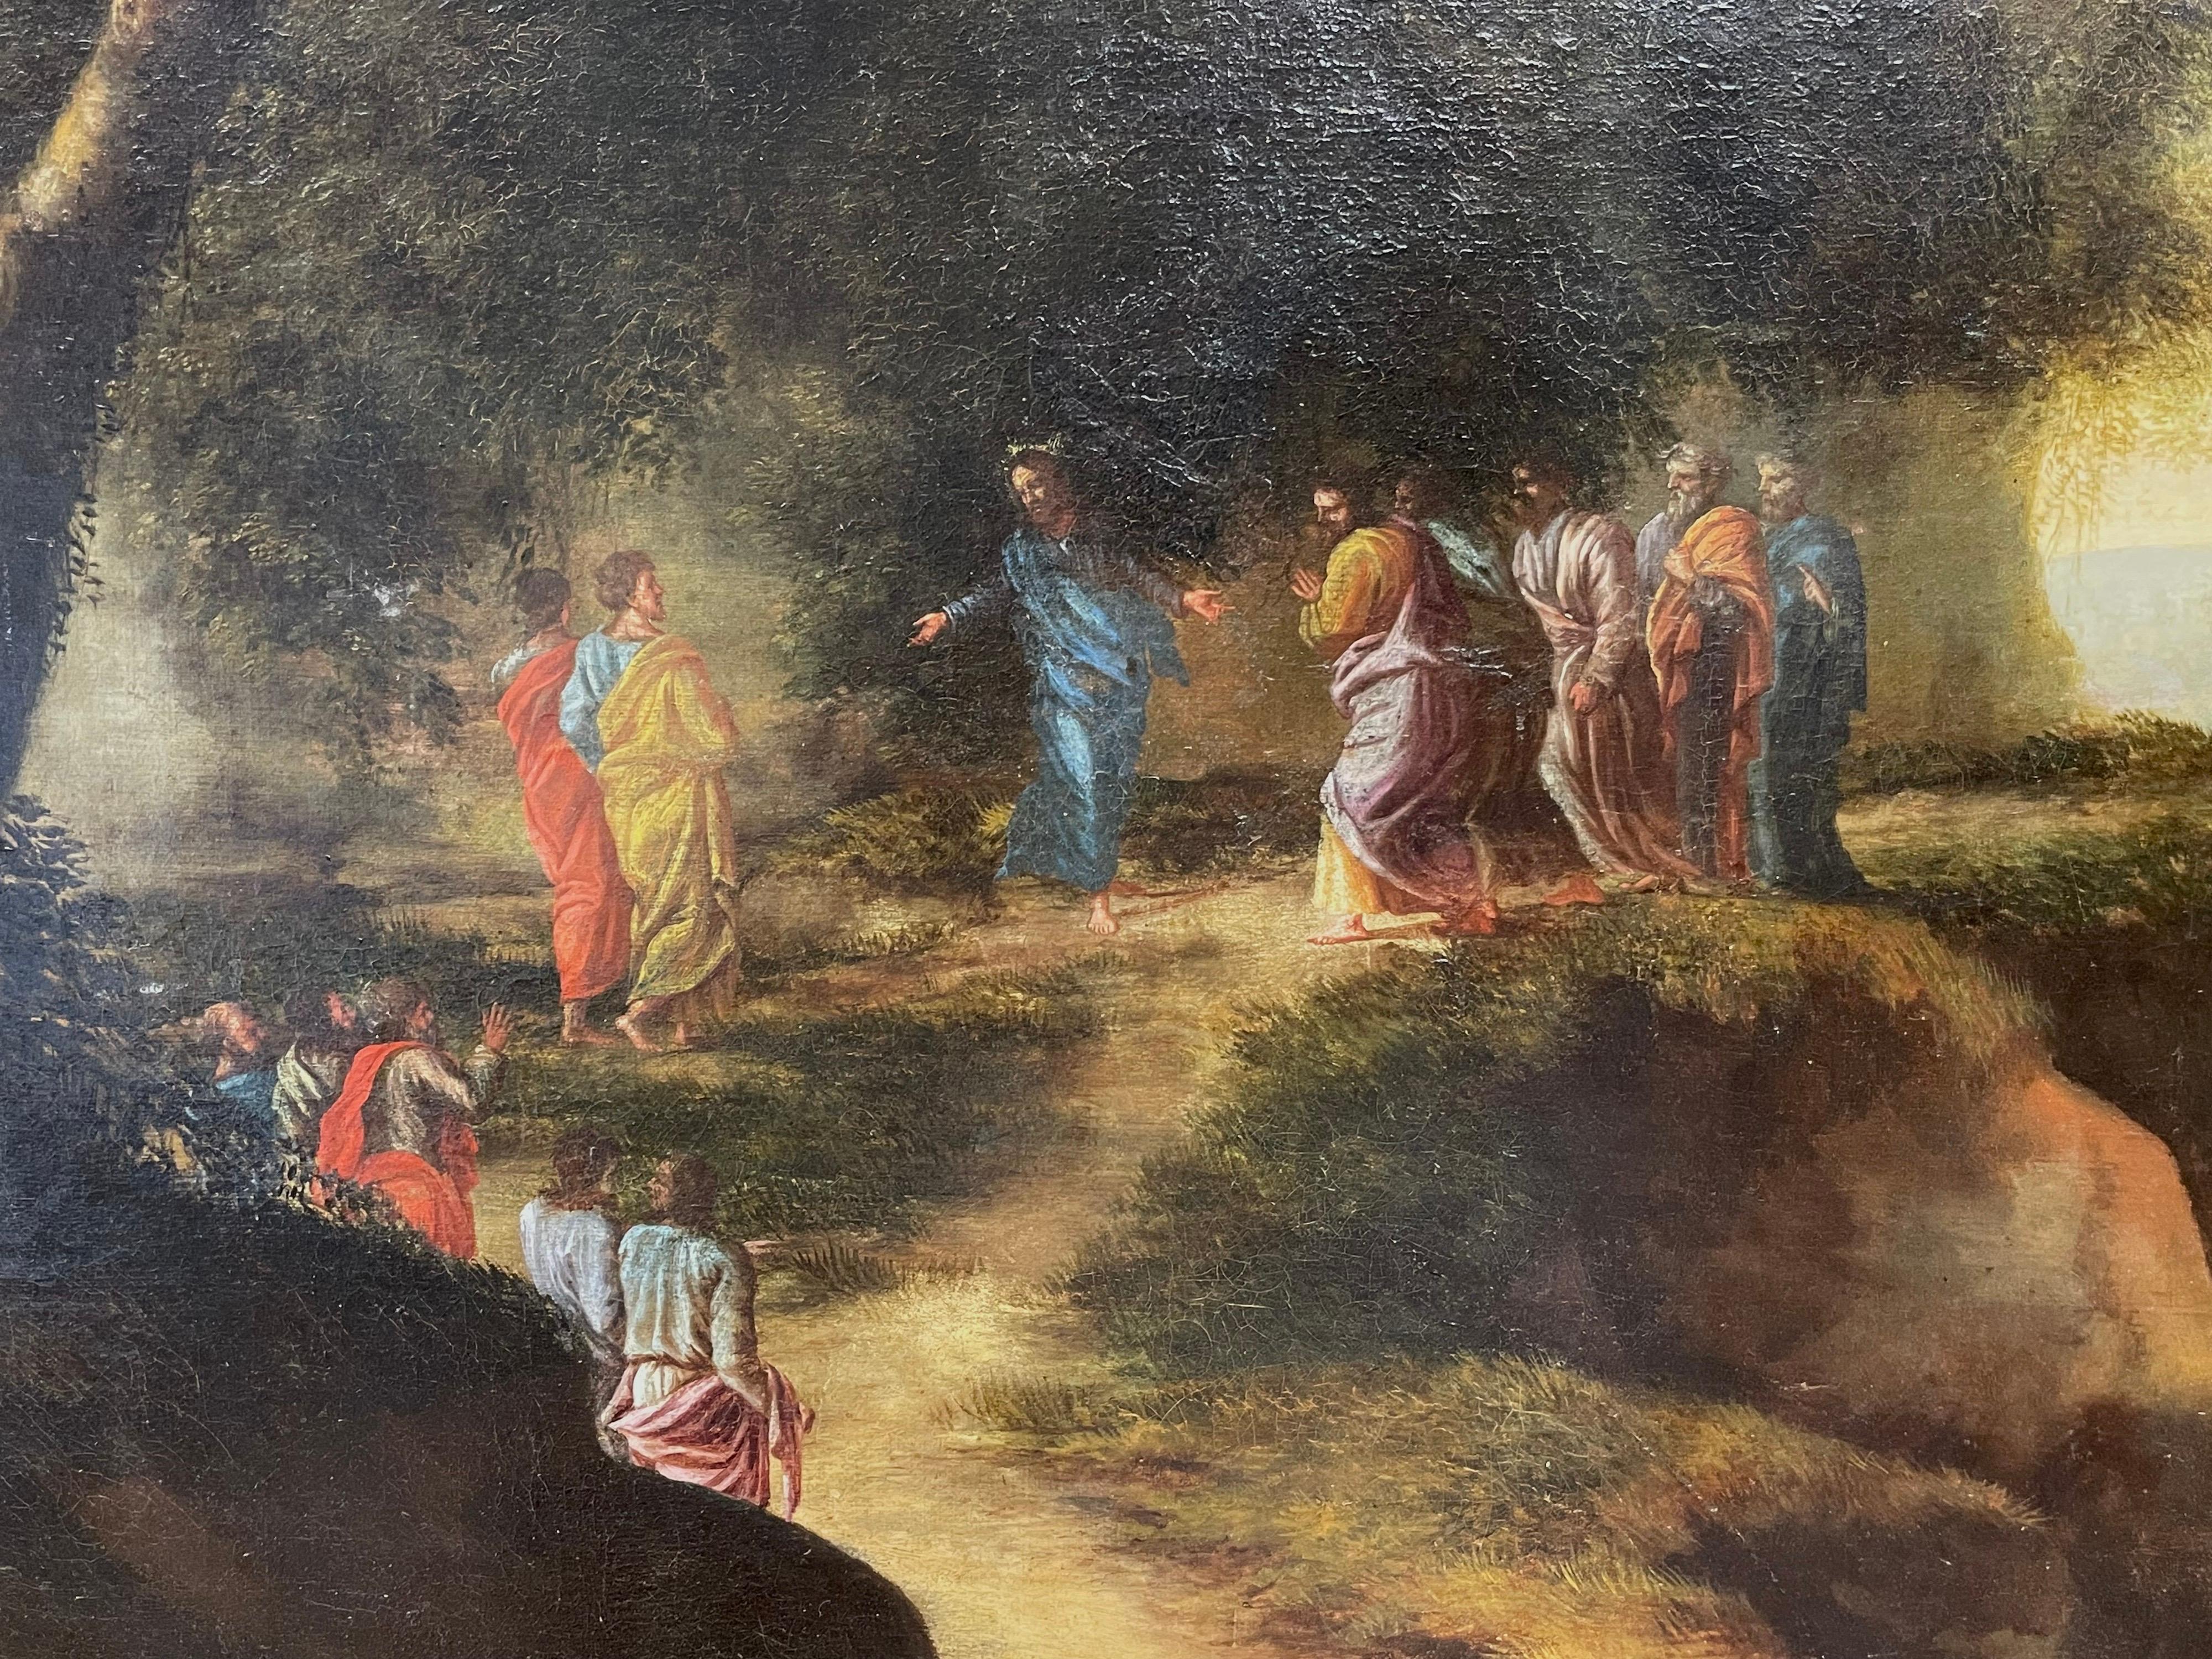 Christ Preaching to the Disciples
French School, 18th century
oil painting on canvas, framed
framed size: 35 x 57 inches
condition: relined canvas and in very presentable and good condition
provenance: from a private collection in western France.